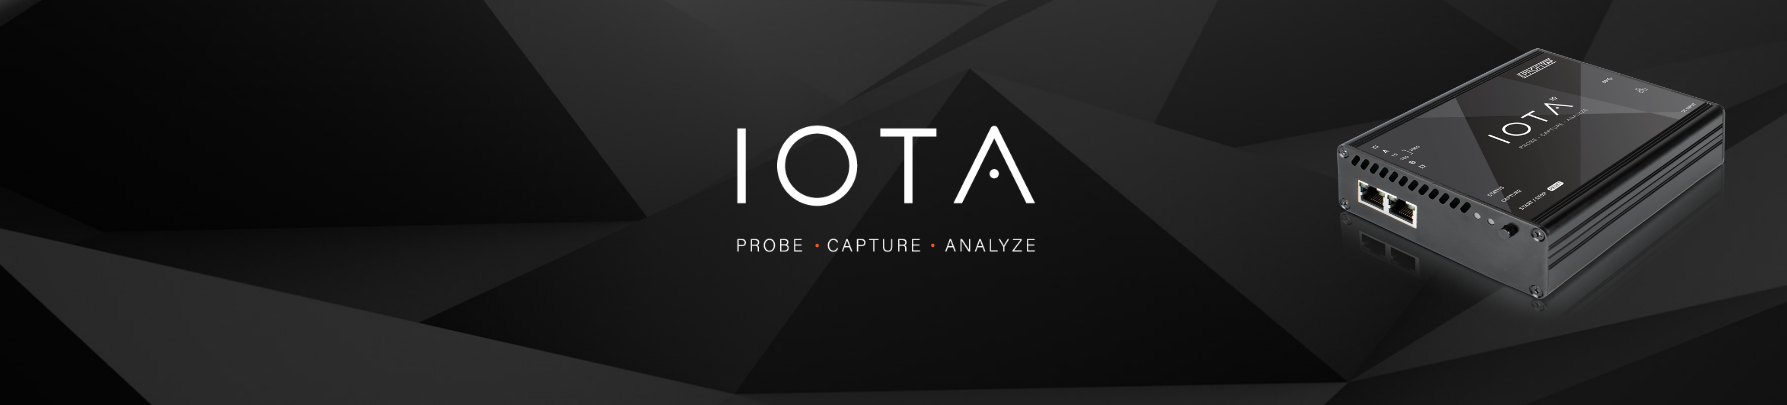 Profitap IOTA - All in one Network Analysis Solution